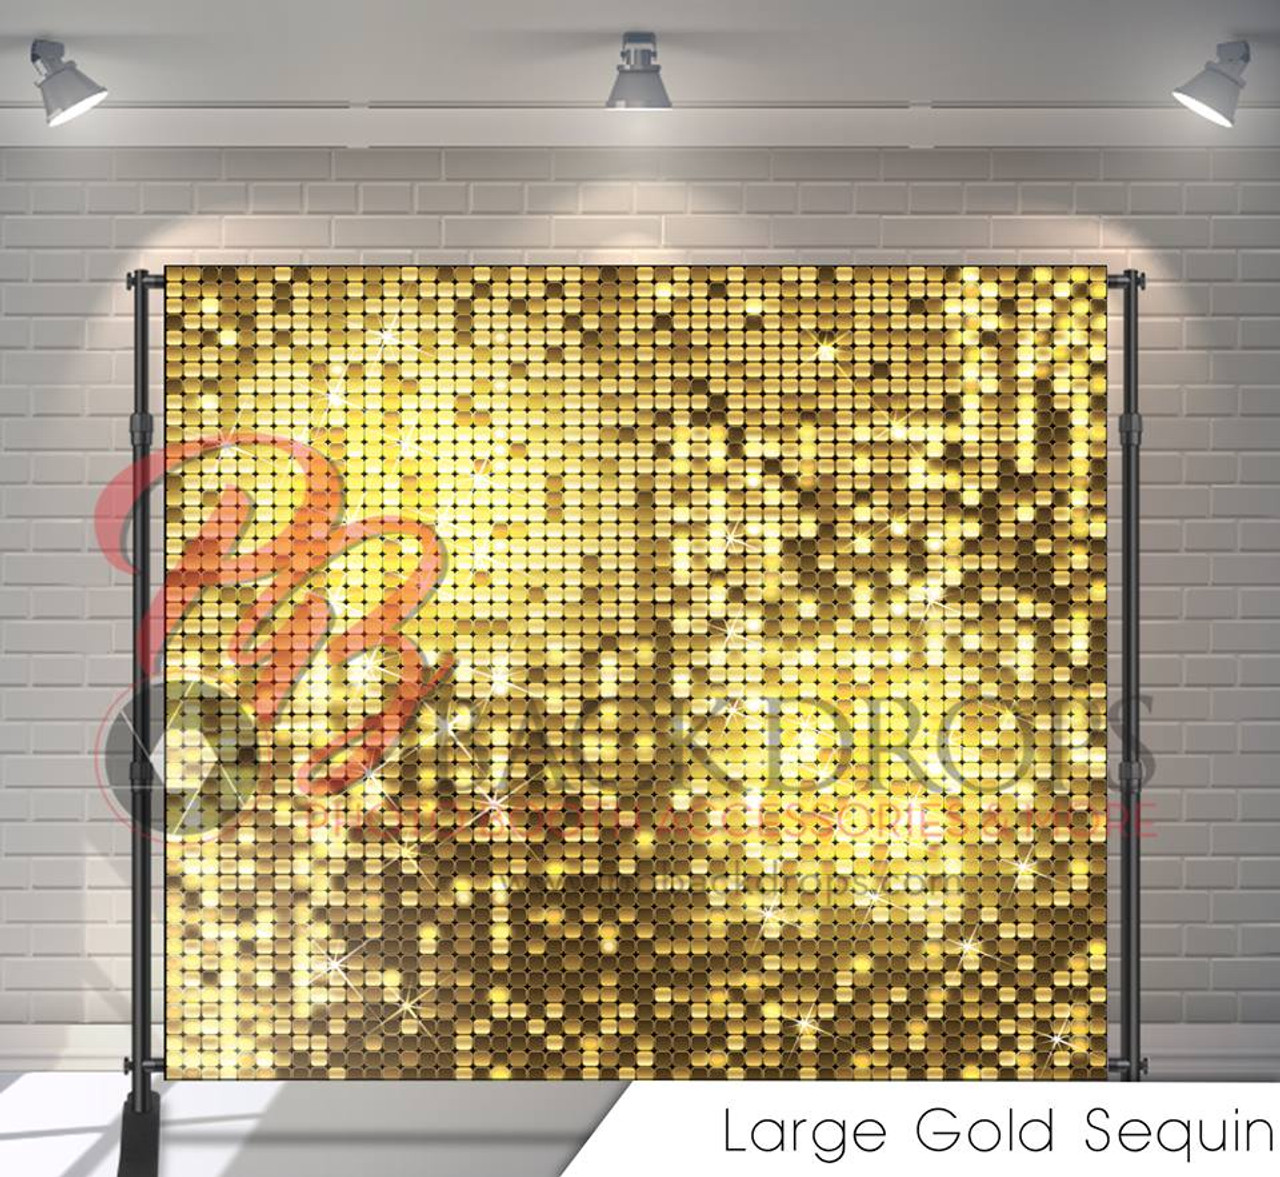 8x8 Printed Tension fabric backdrop (Large Gold Sequins) - PB Backdrops